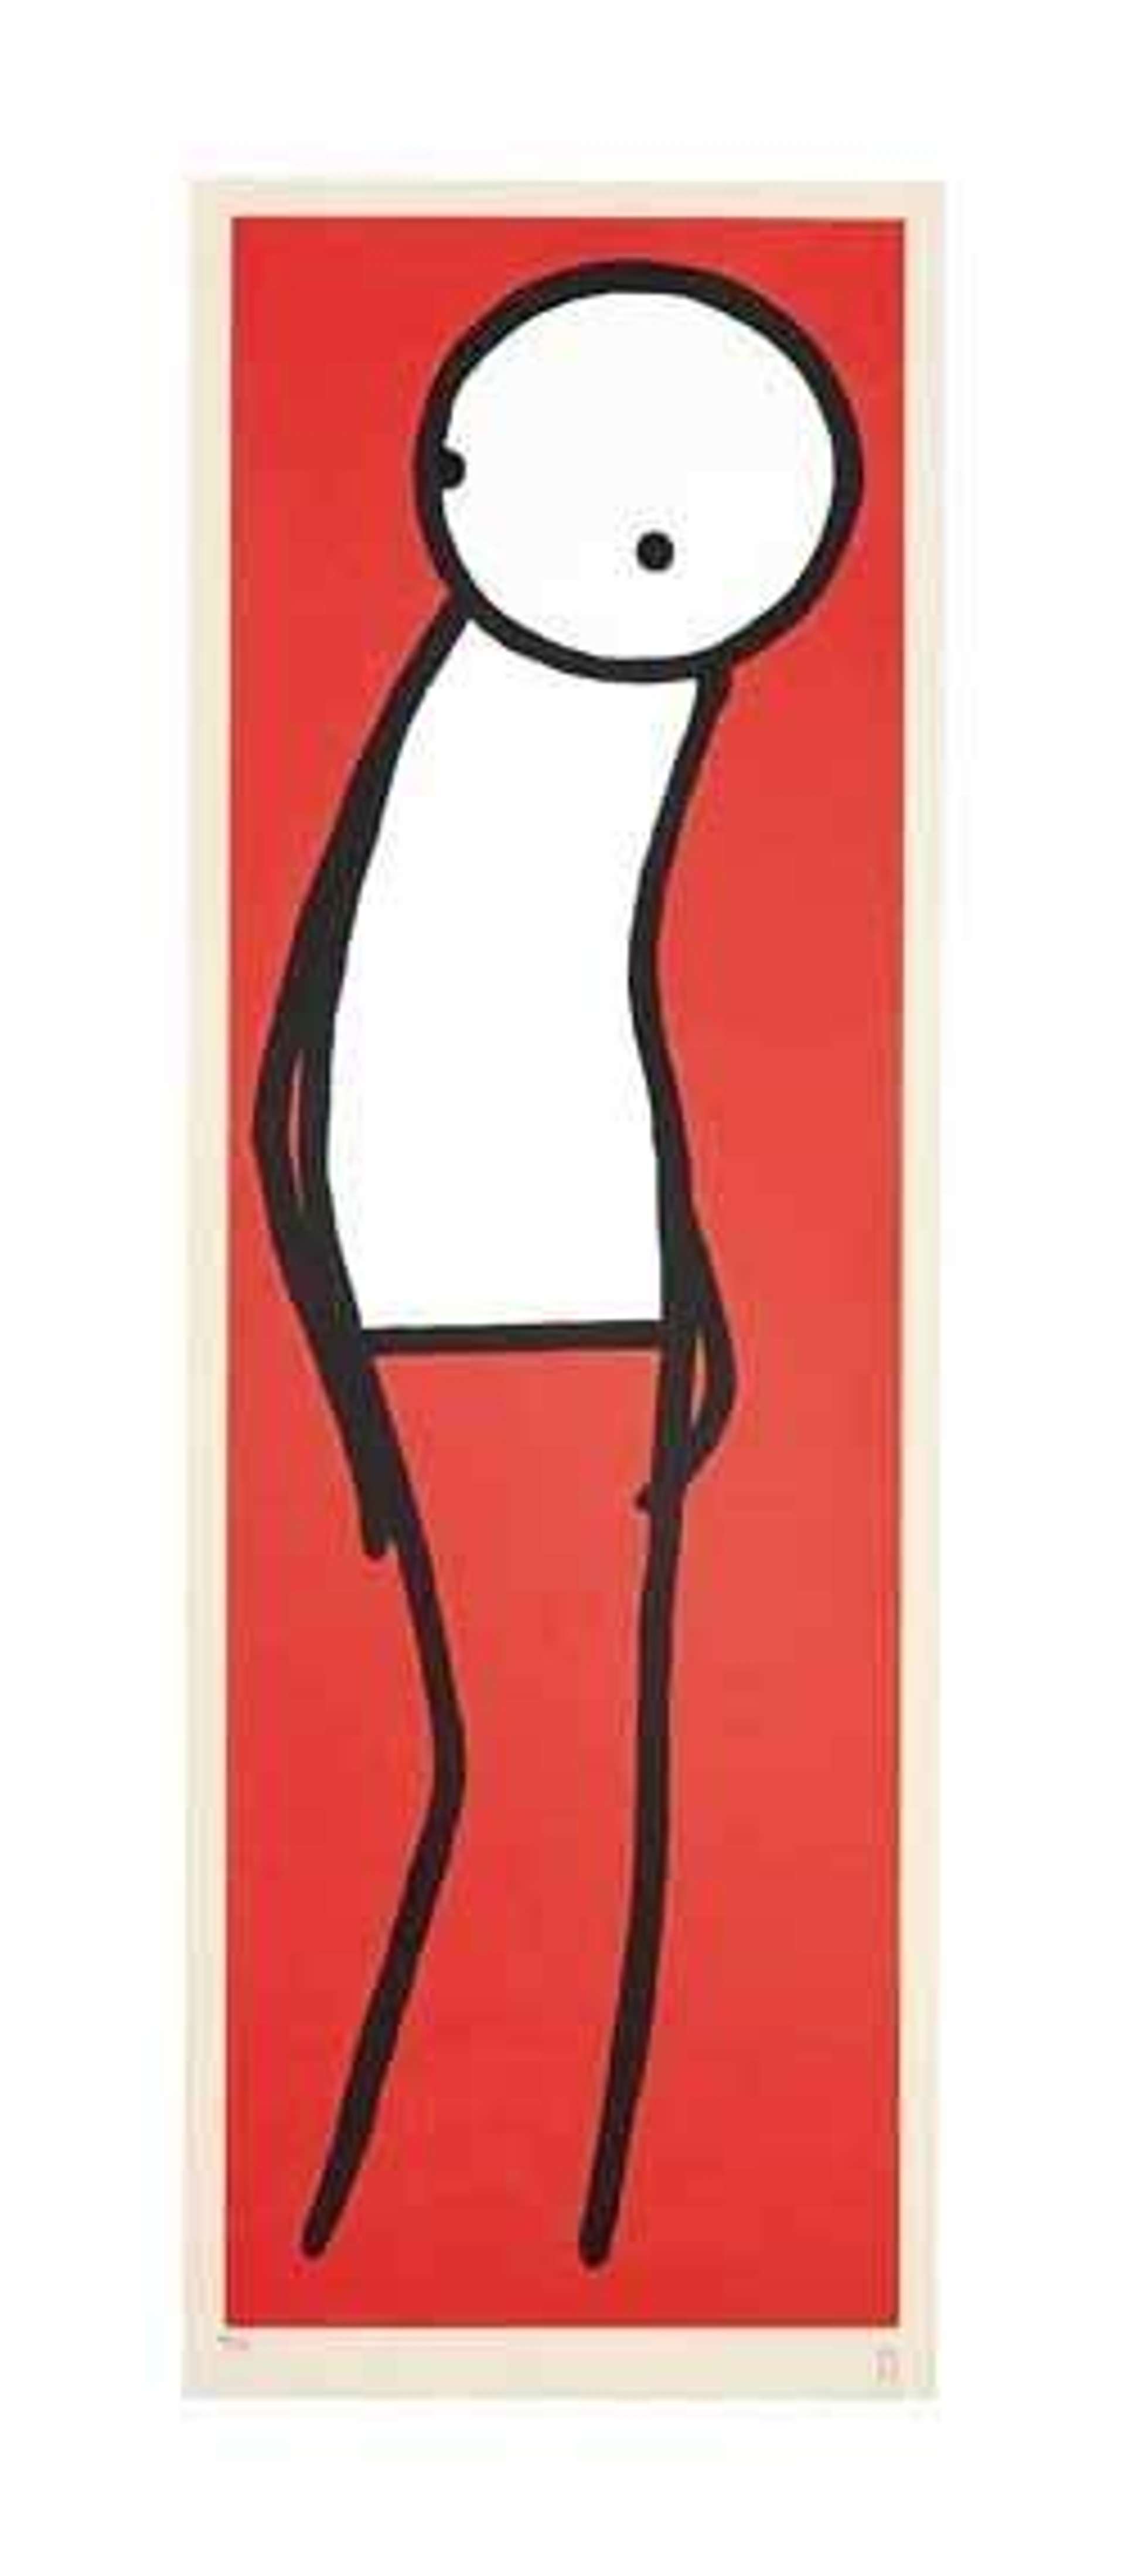 STIK’s Diva (red). A screenprint of a black stick figure with a white body, standing looking to their side against a red background. 